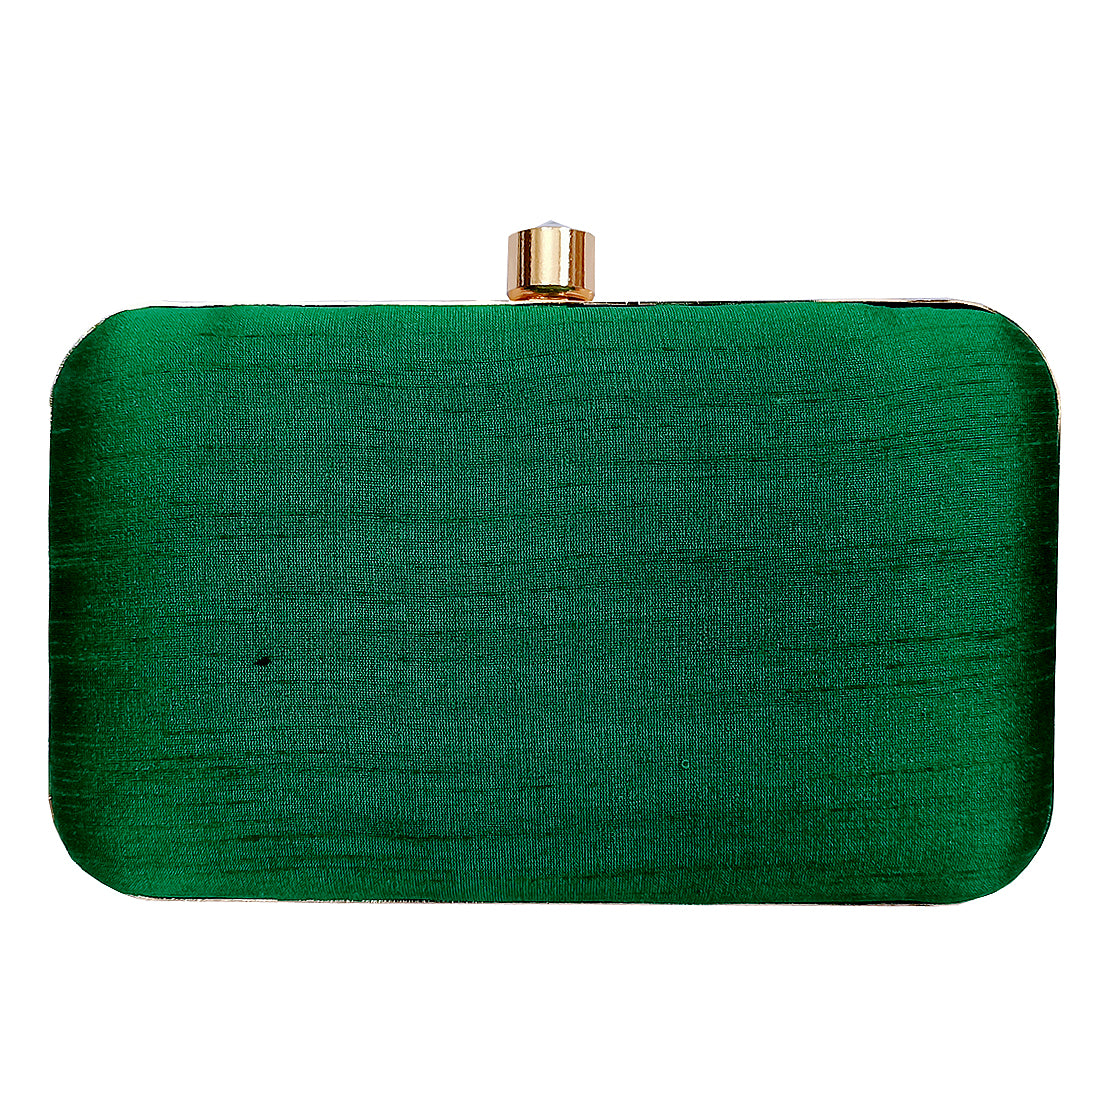 Women's Green Color Adorn Embroidered & Embelished Party Clutch - VASTANS